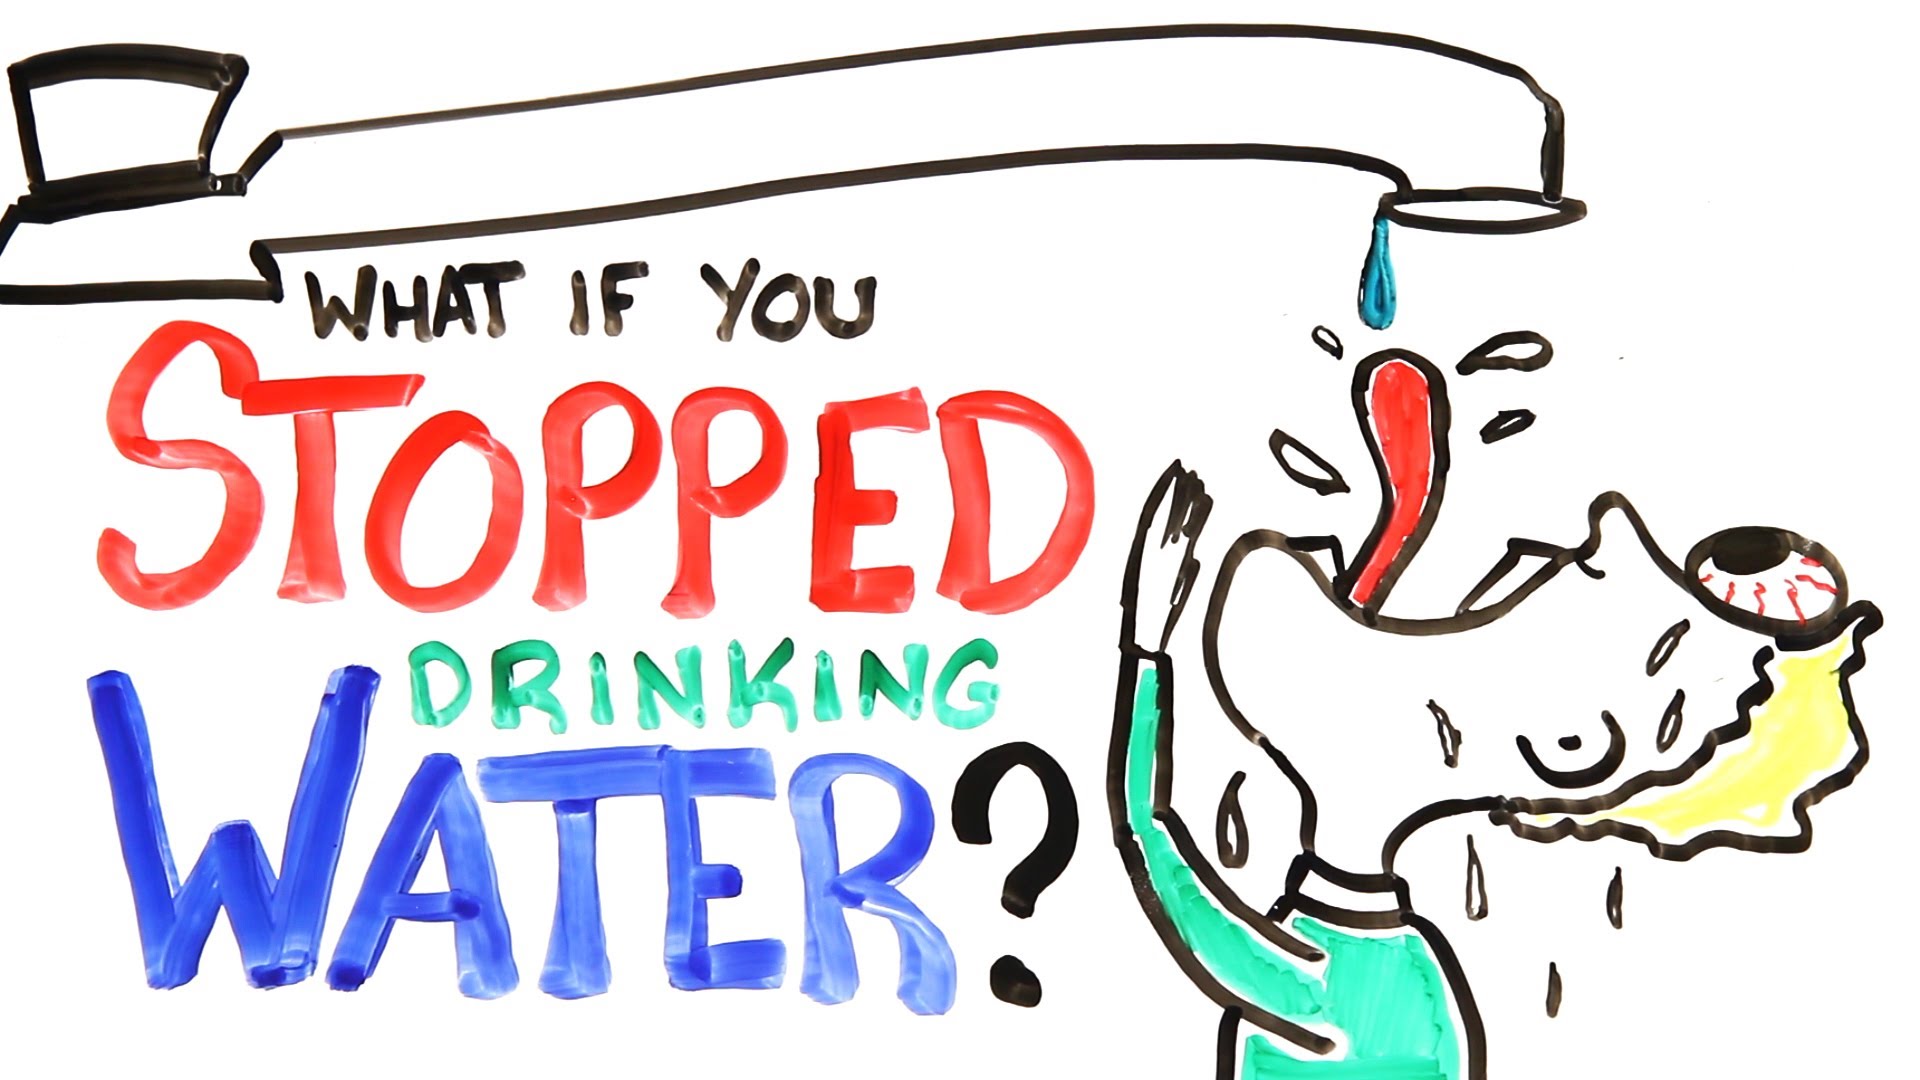 Dont day. What will happen if. What happen if we don't save Water. Stop drinking.